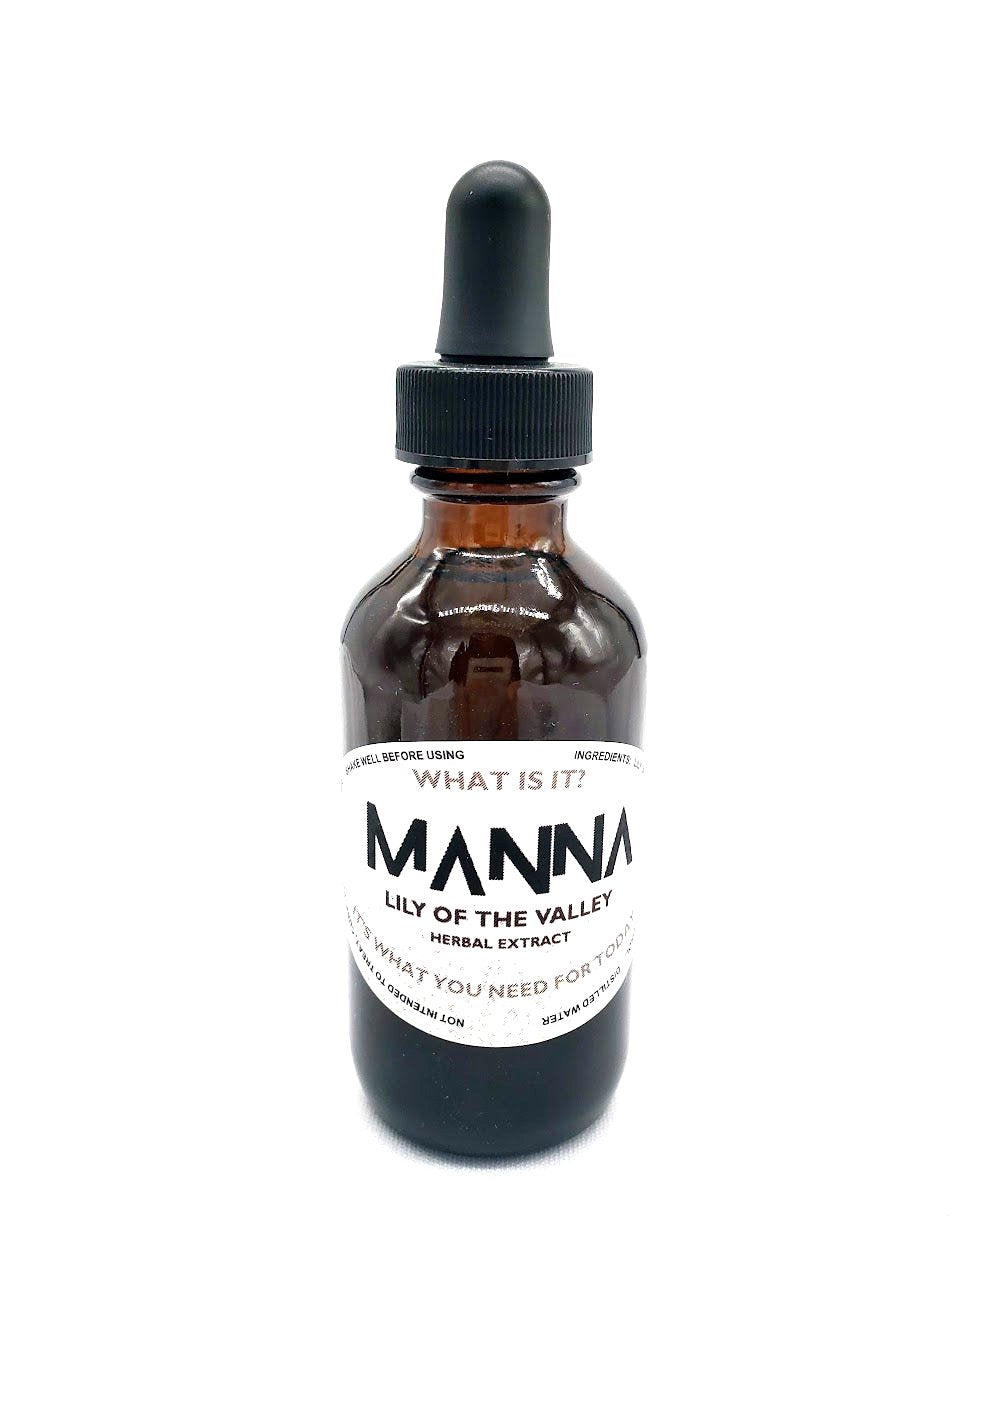 Lily of the Valley extract, convallaria majalis – MannaHerbalsLLC